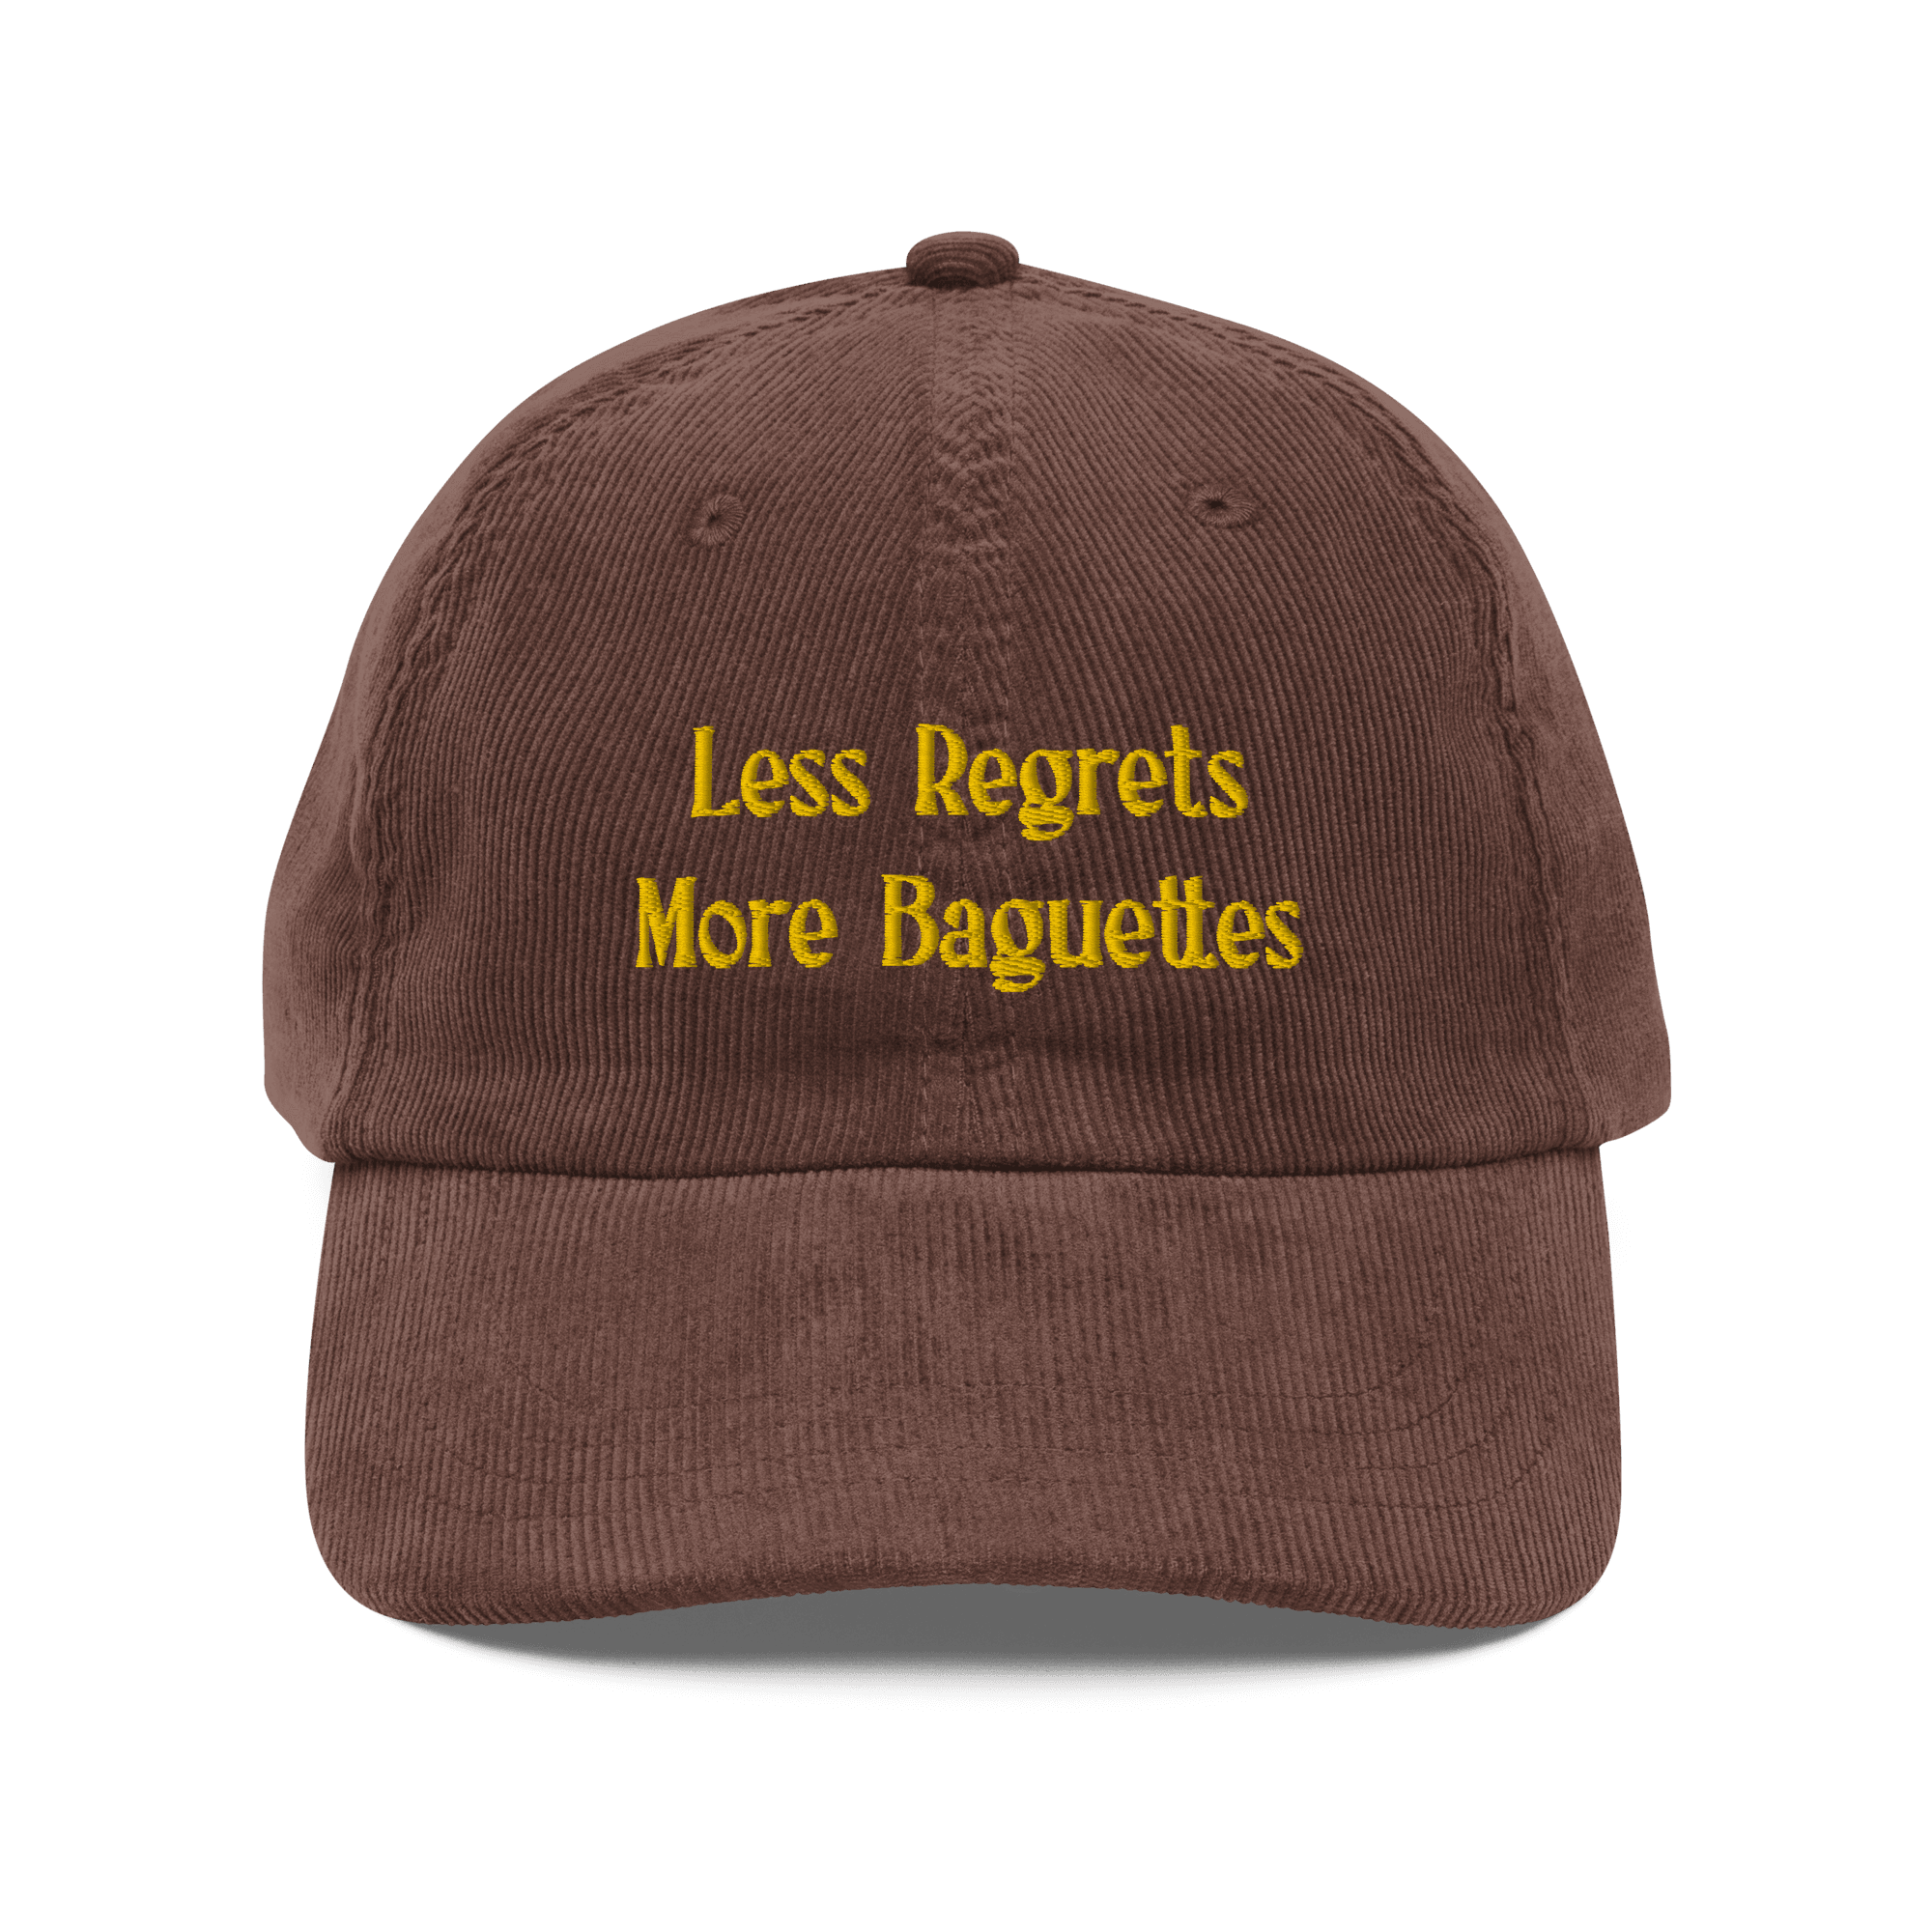 Less Regrets, More Baguettes Embroidered Hat - Polychrome Goods 🍊